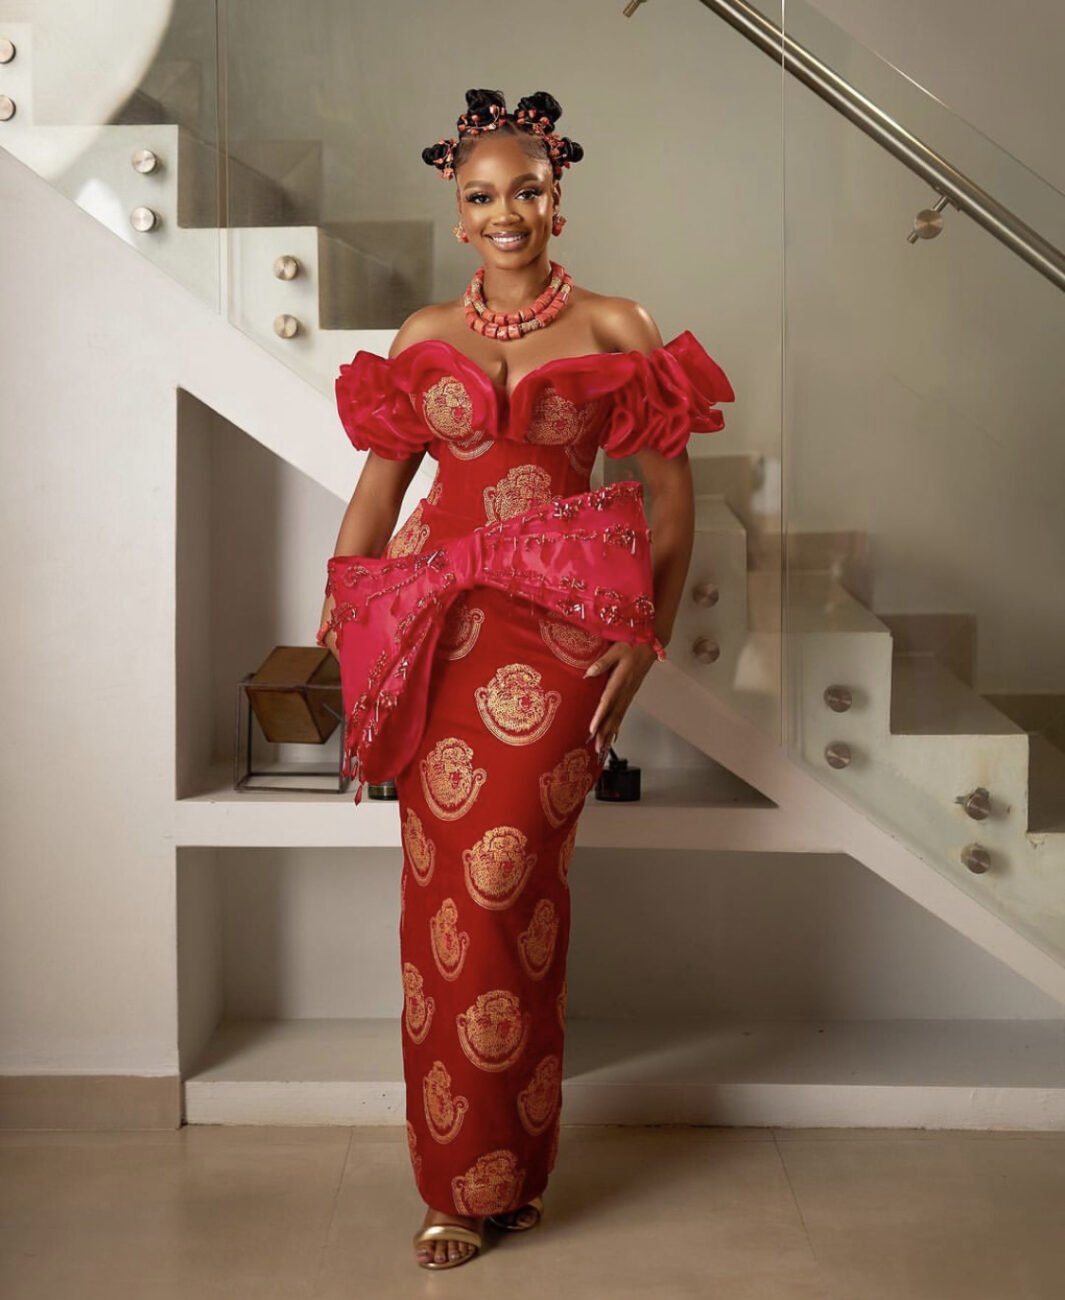 Diana Eneje in a traditional Igbo attire.